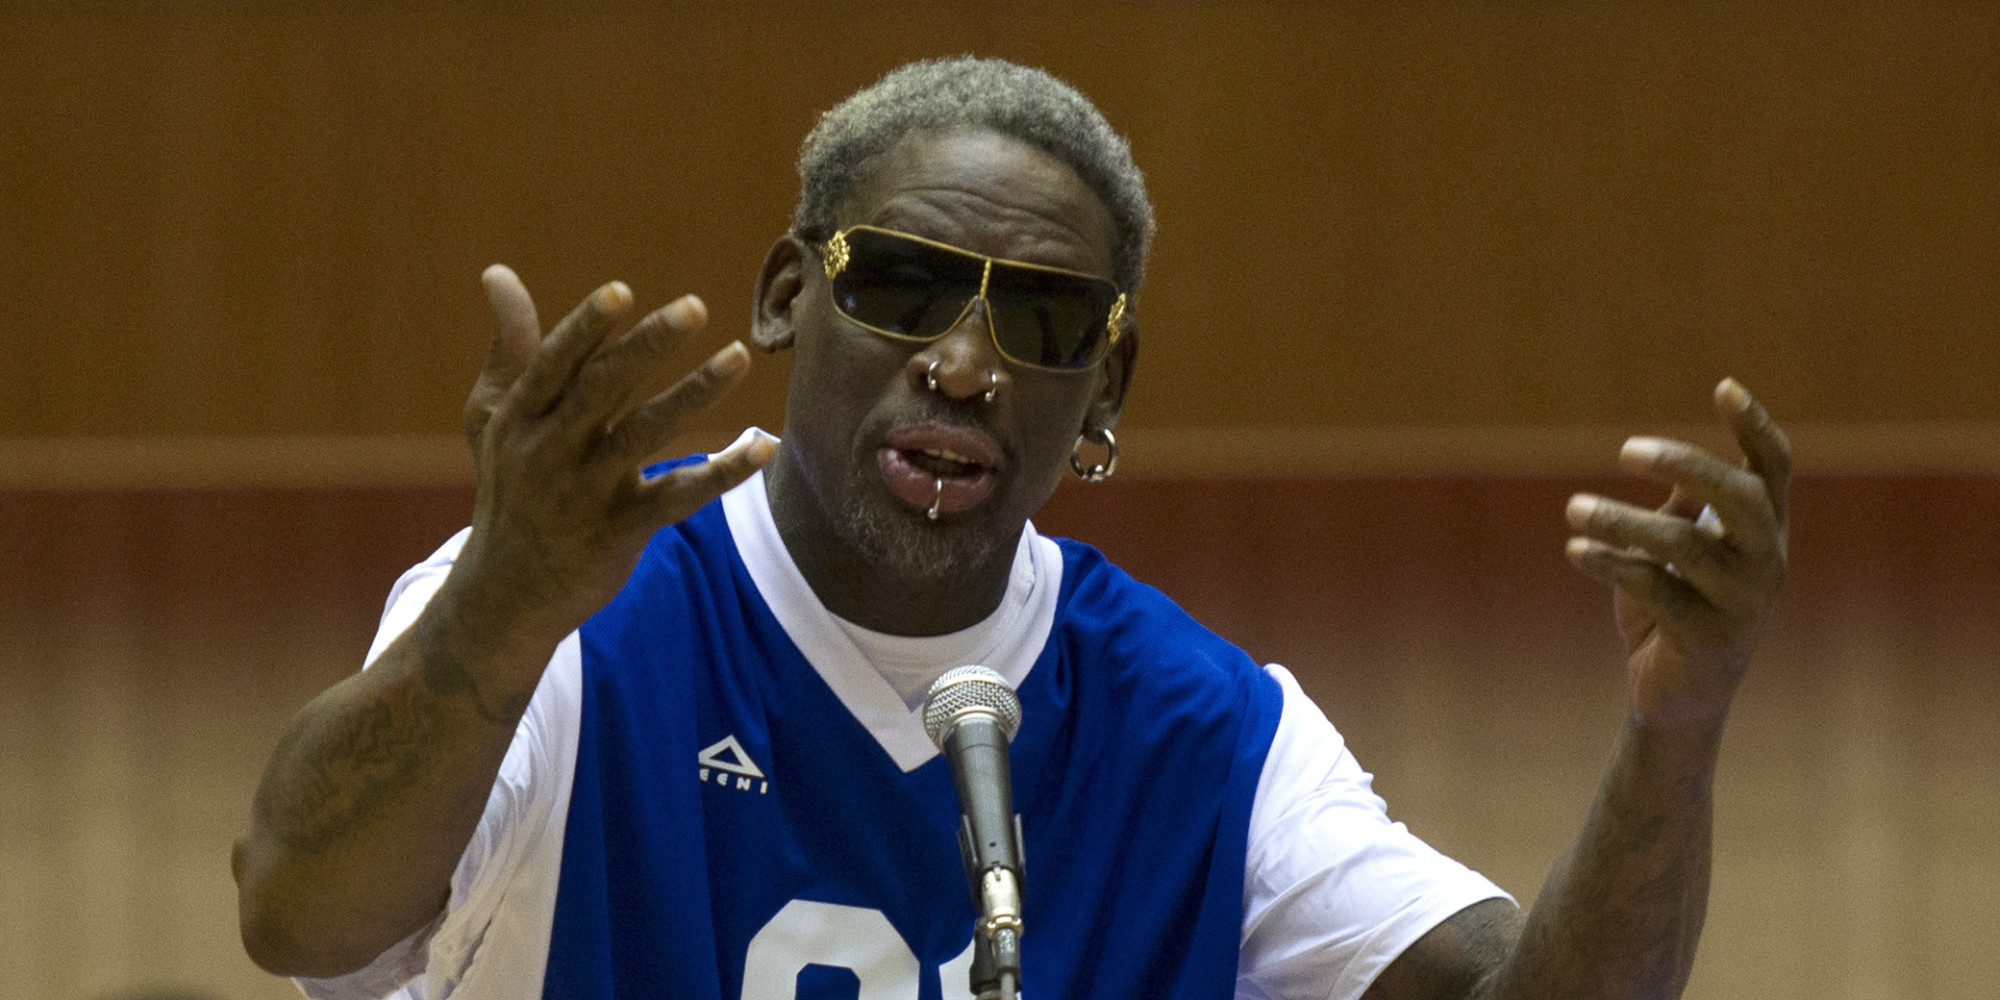 Dennis Rodman was too broke to pay the $800,000 in child support he owed his third wife.